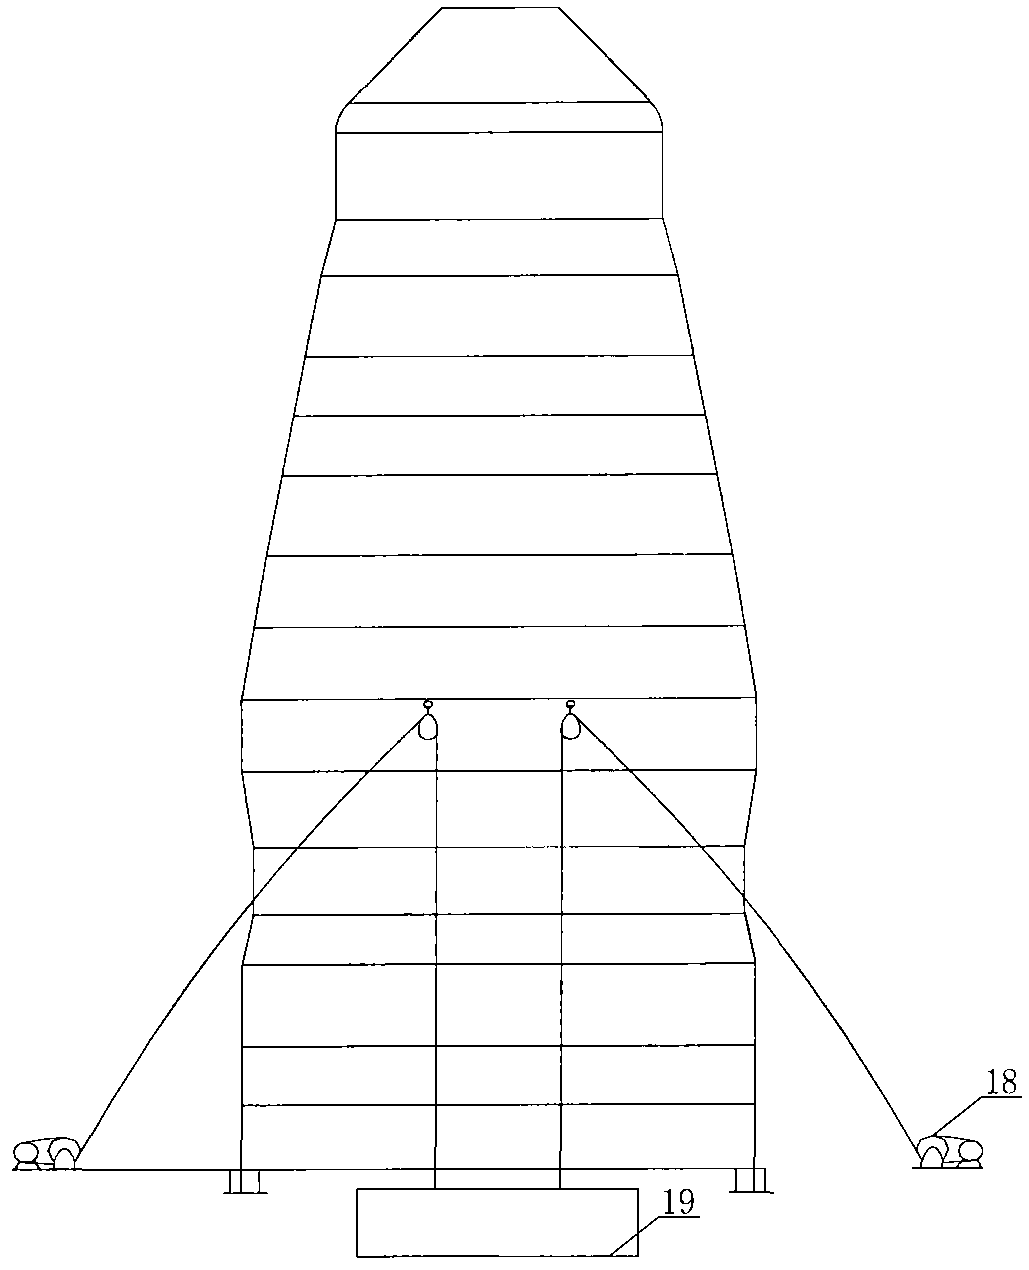 Installation method for quickly removing and replacing middle-section furnace casing of large blast furnace